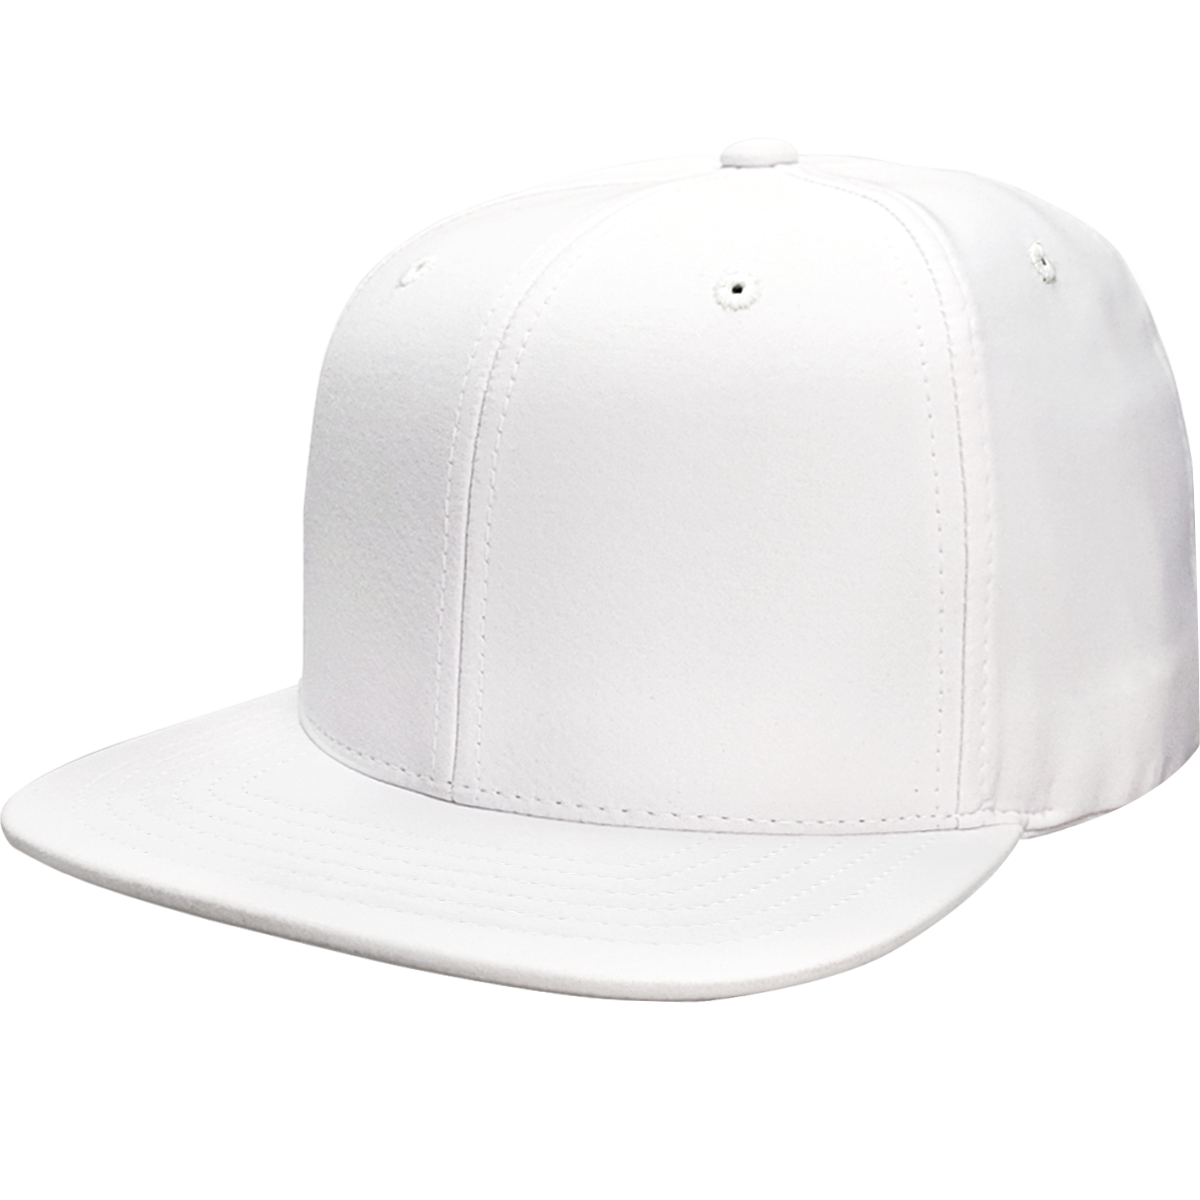 6 Panel Structured Performance Cap with Flat Bill- PR20